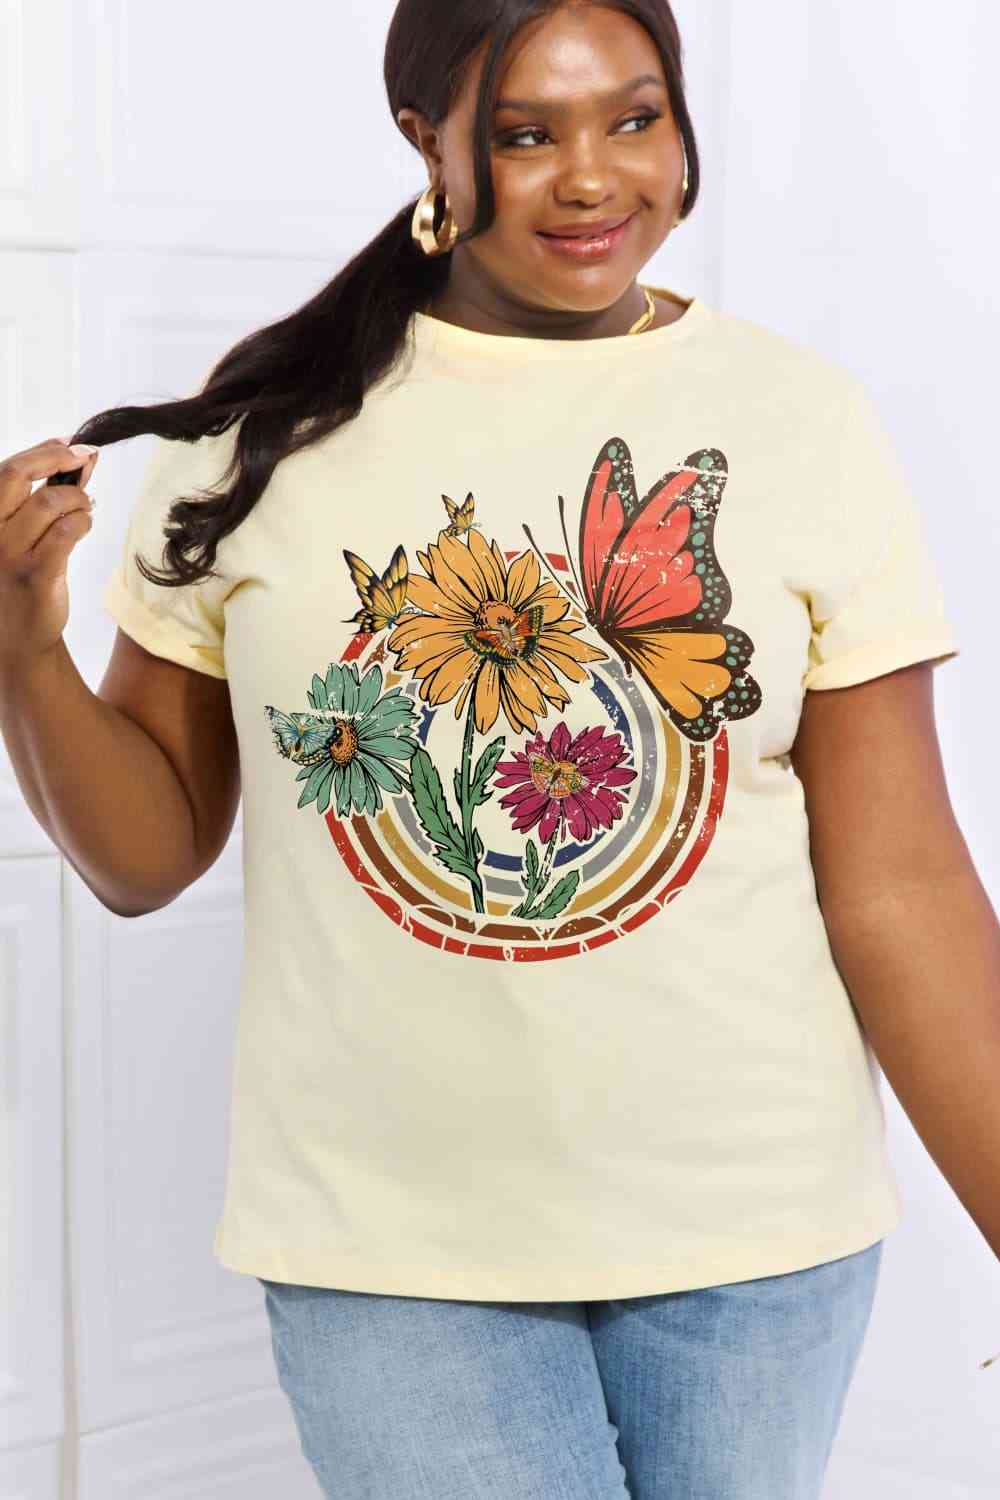 Flower & Butterfly Graphic Cotton Tee - Beige / S - T-Shirts - Shirts & Tops - 13 - 2024